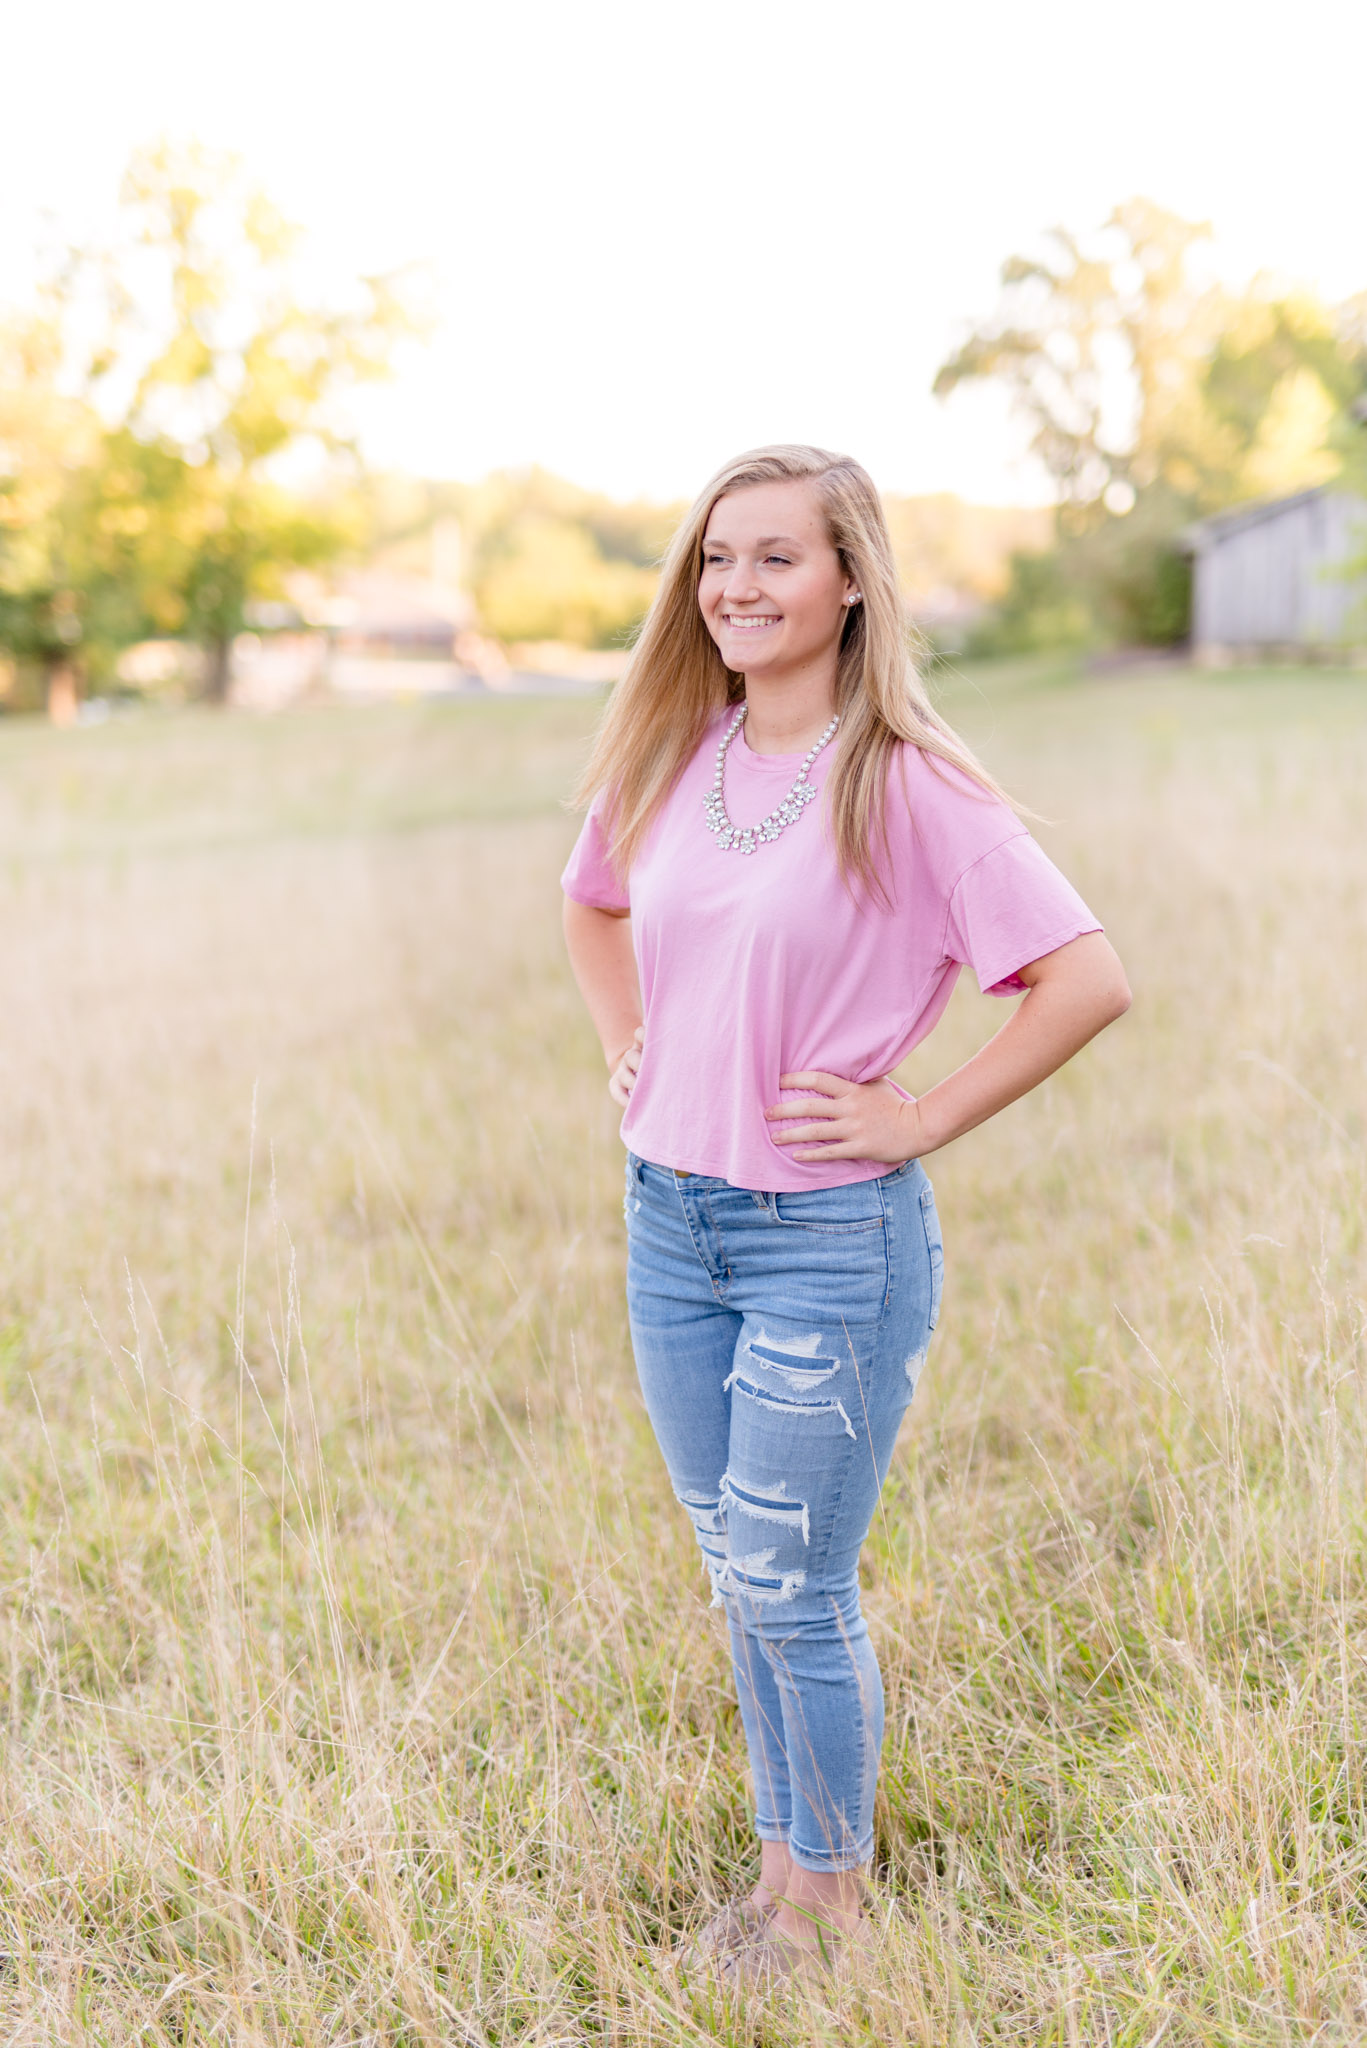 Senior Model looks to the side and laughs